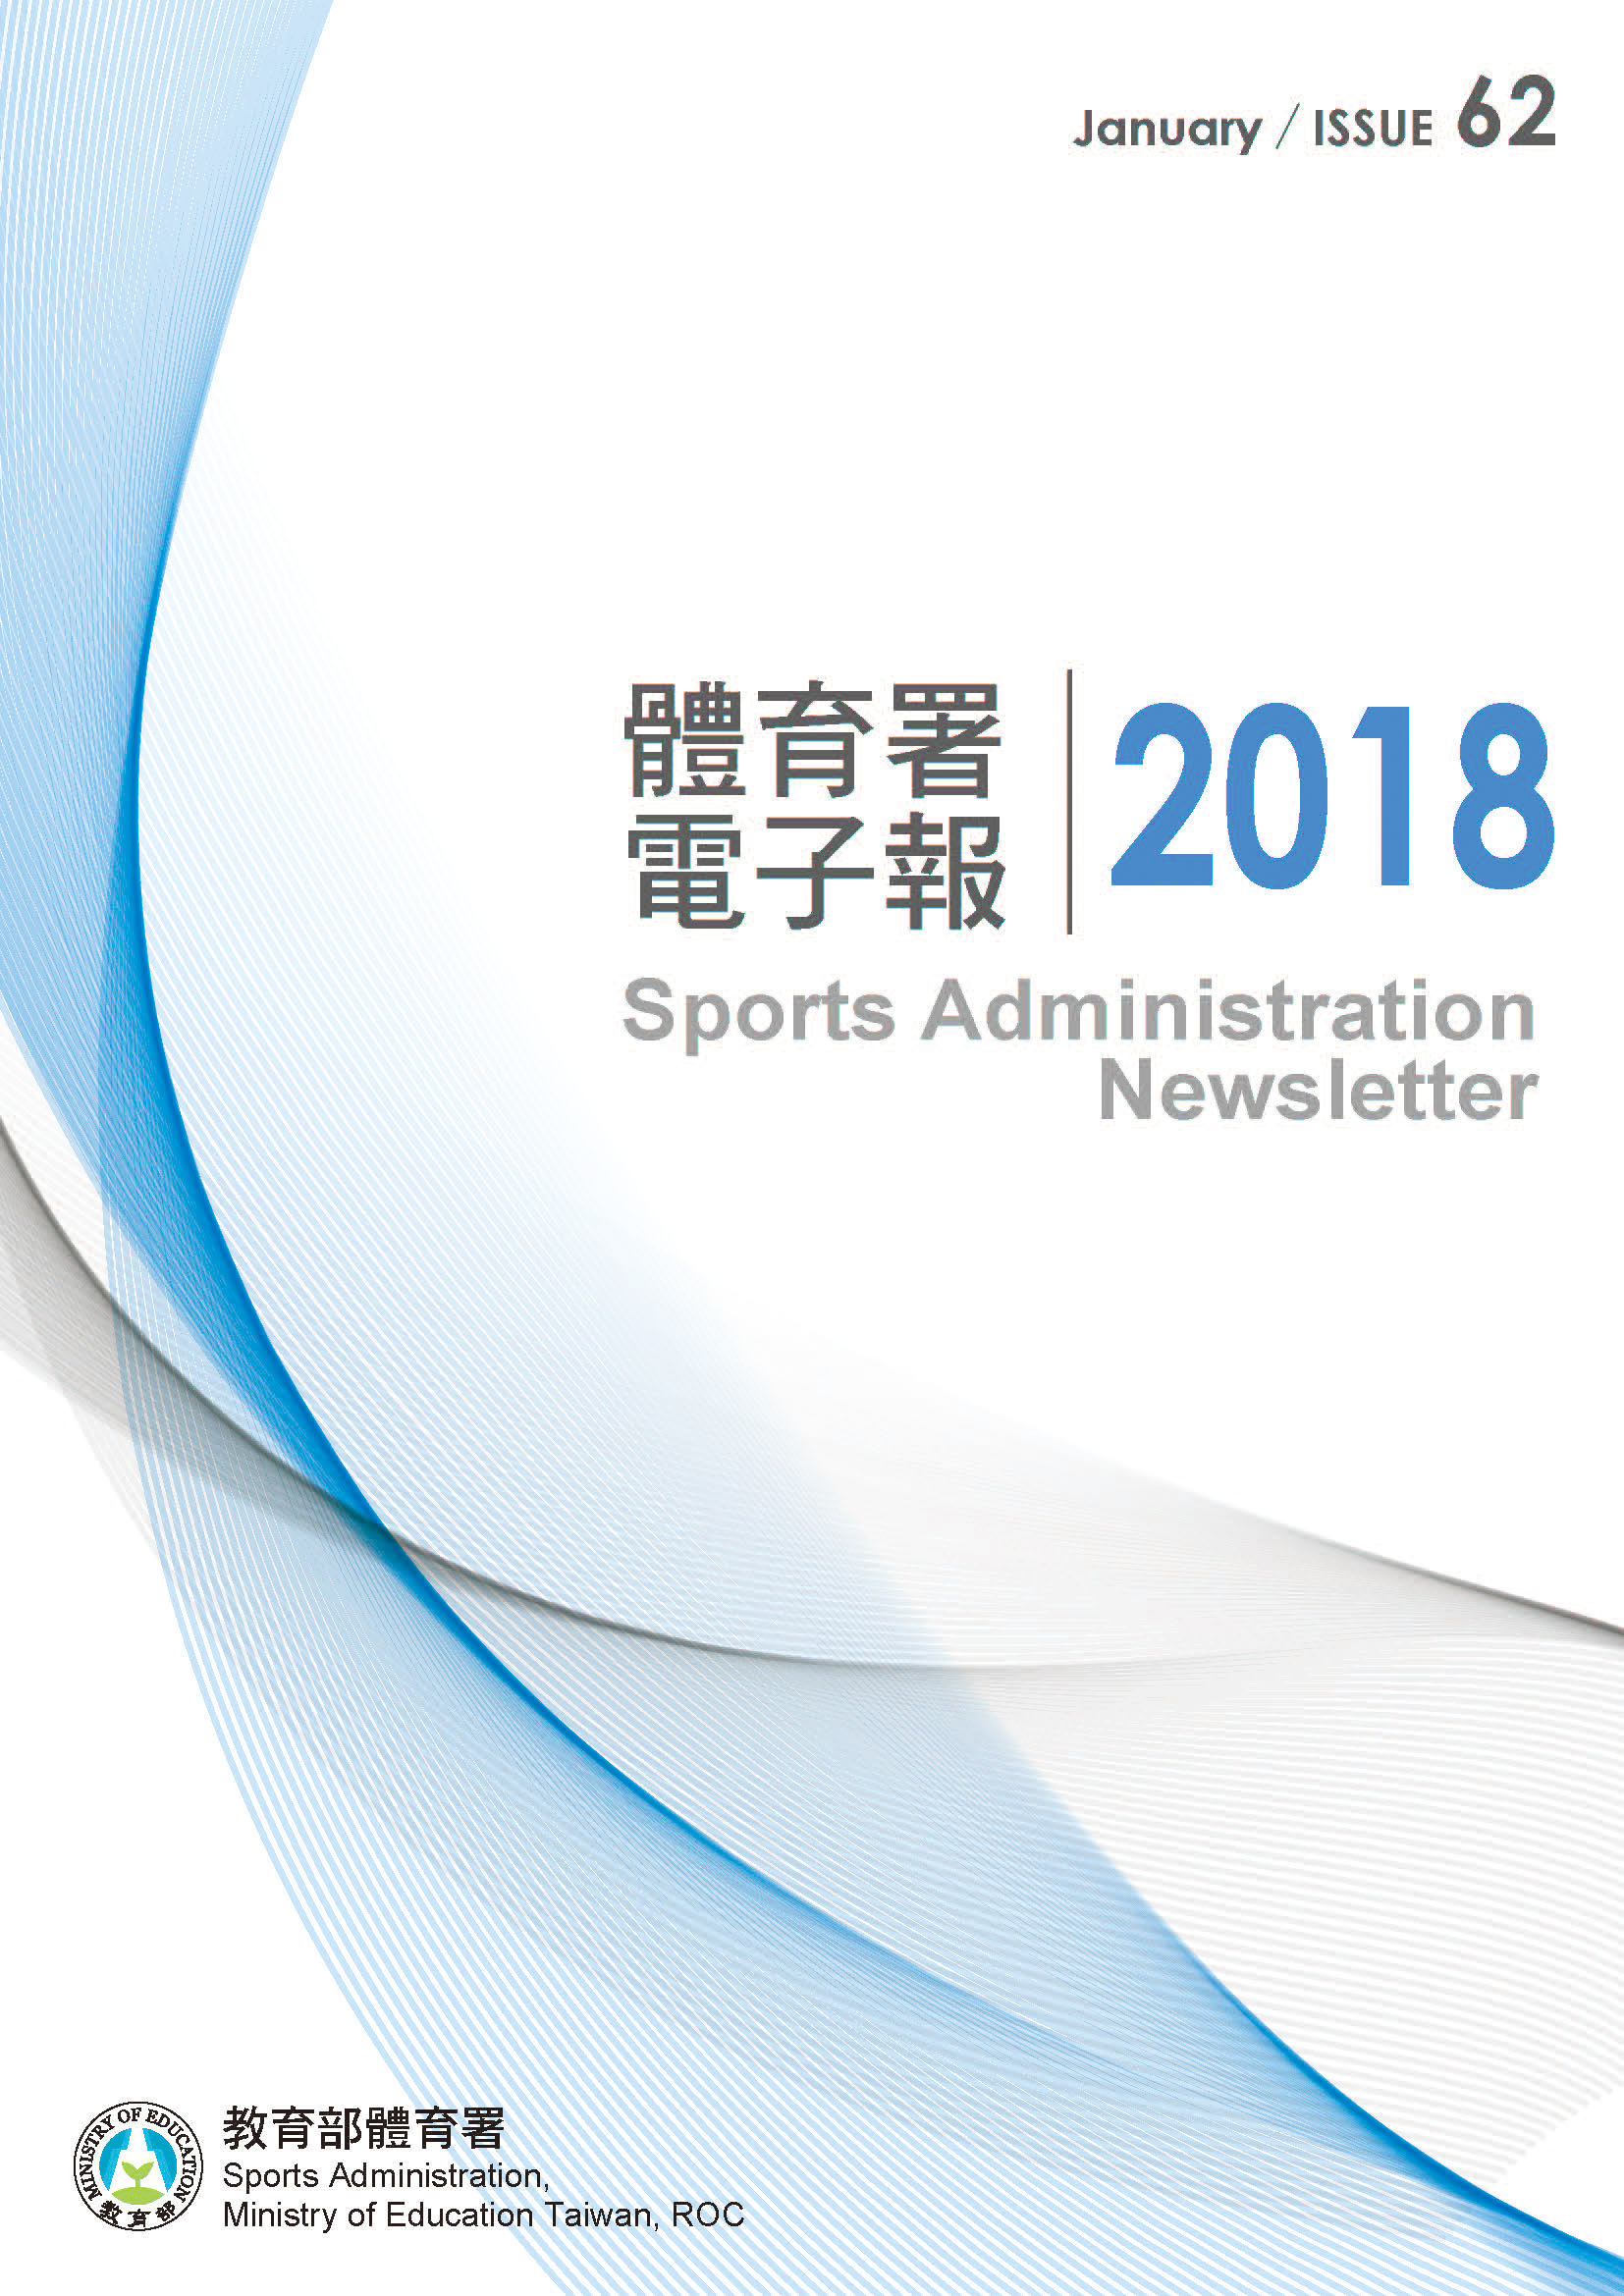 Sports Administration Newsletter 62 January 2018 p1